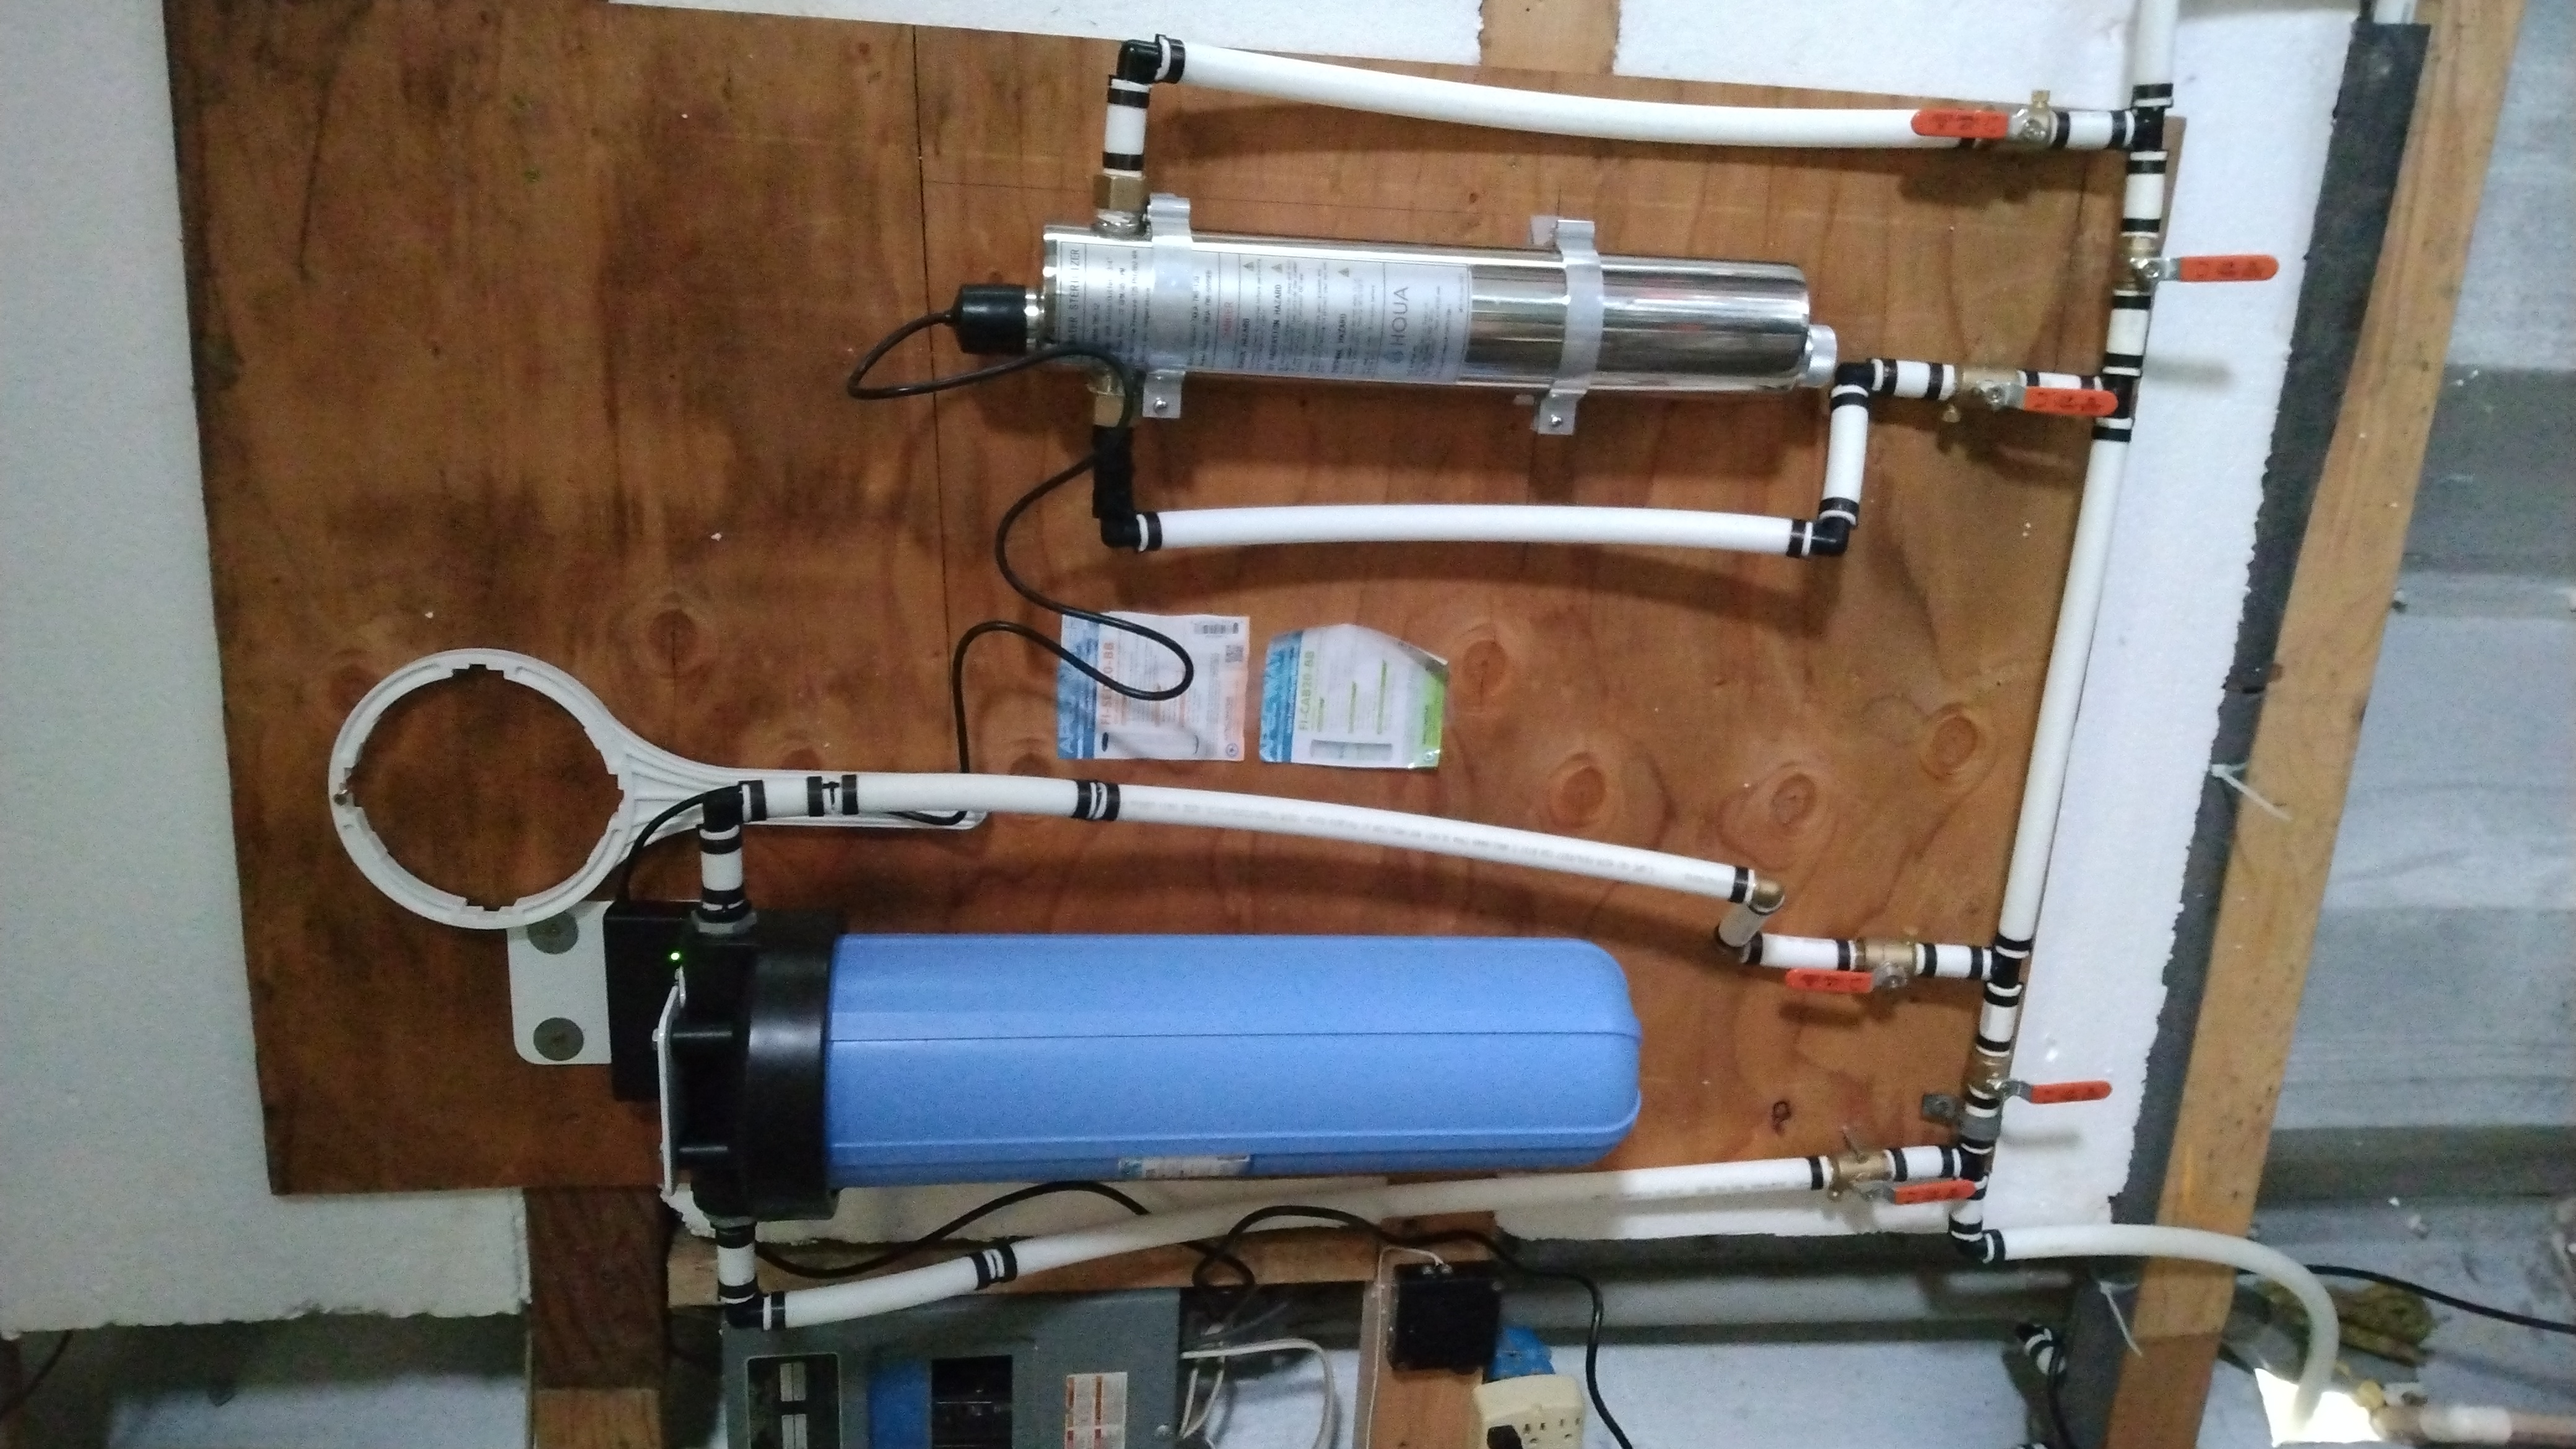 Some pipes attached to a piece of plywood, in an arrangement with valves such that two filters (a paper large filter and UV-light filter) can be activated or isolated